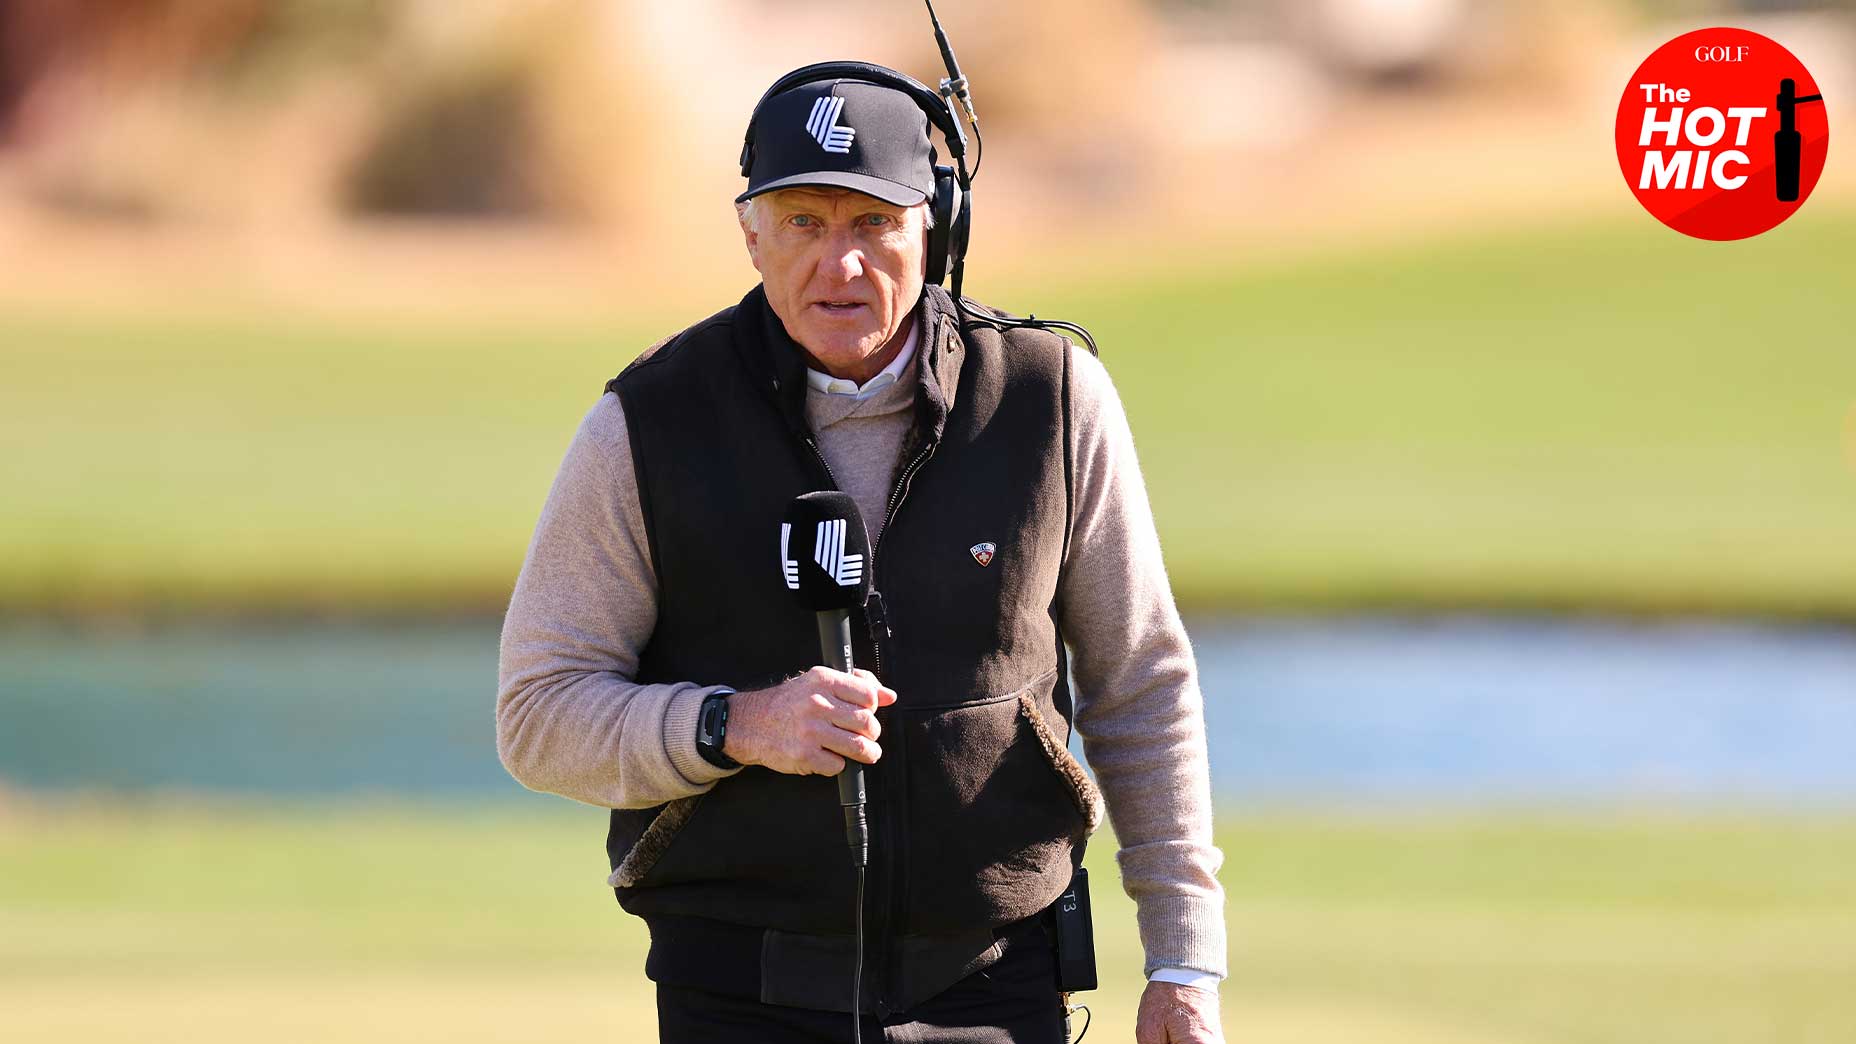 greg norman speaks into microphone at LIV Vegas event in vest